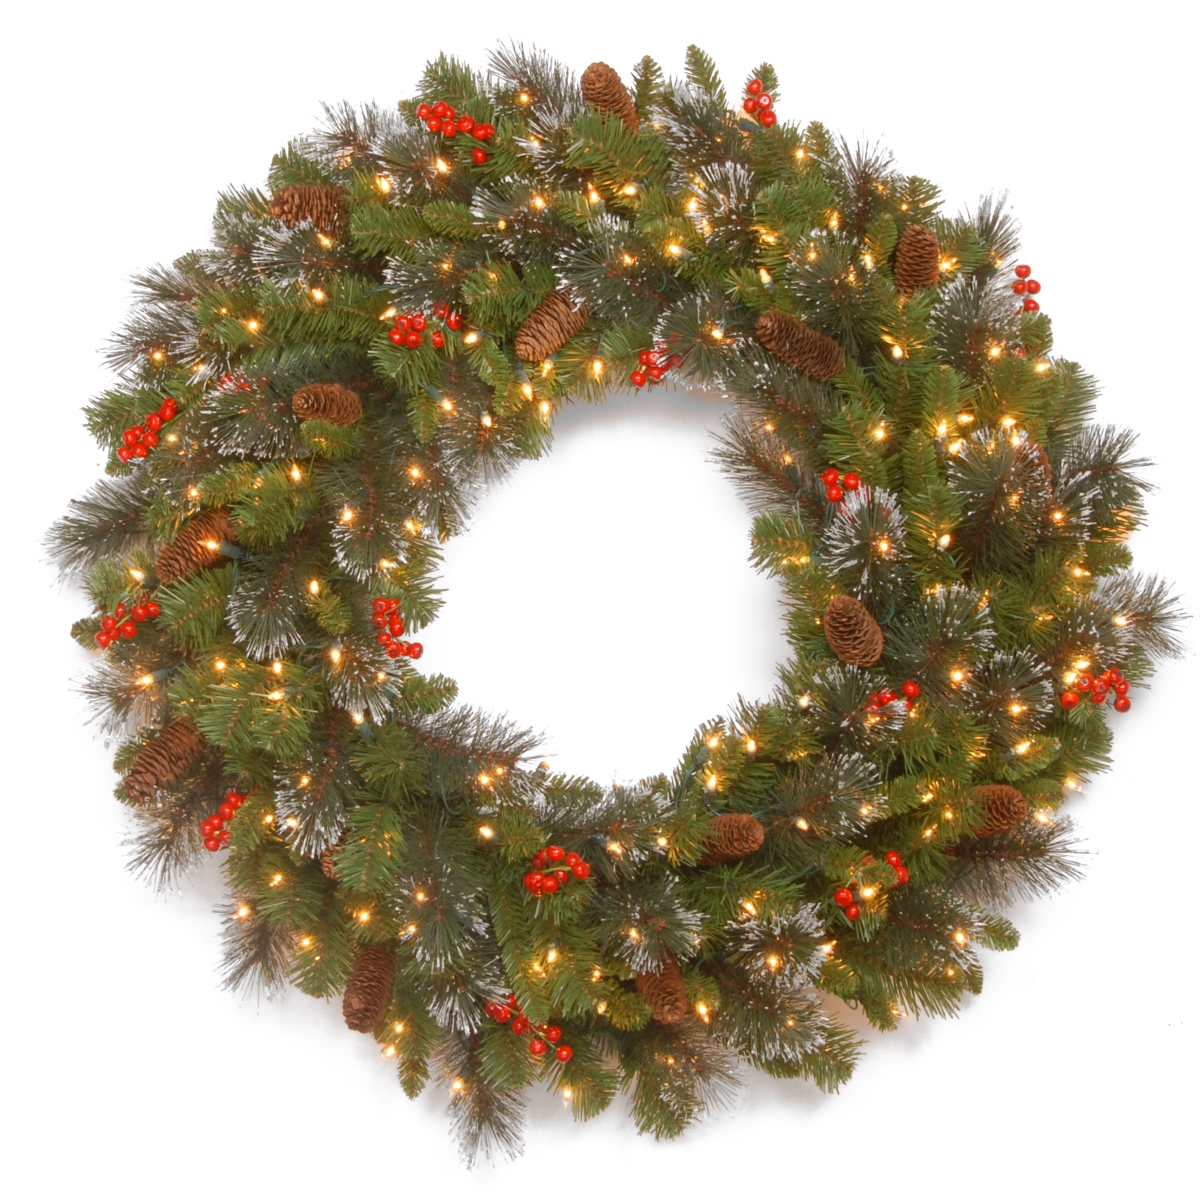 36 In. Crestwood Spruce Wreath With Silver Bristle, Cones, Red Berries & Glitter With 200 Clear Lights